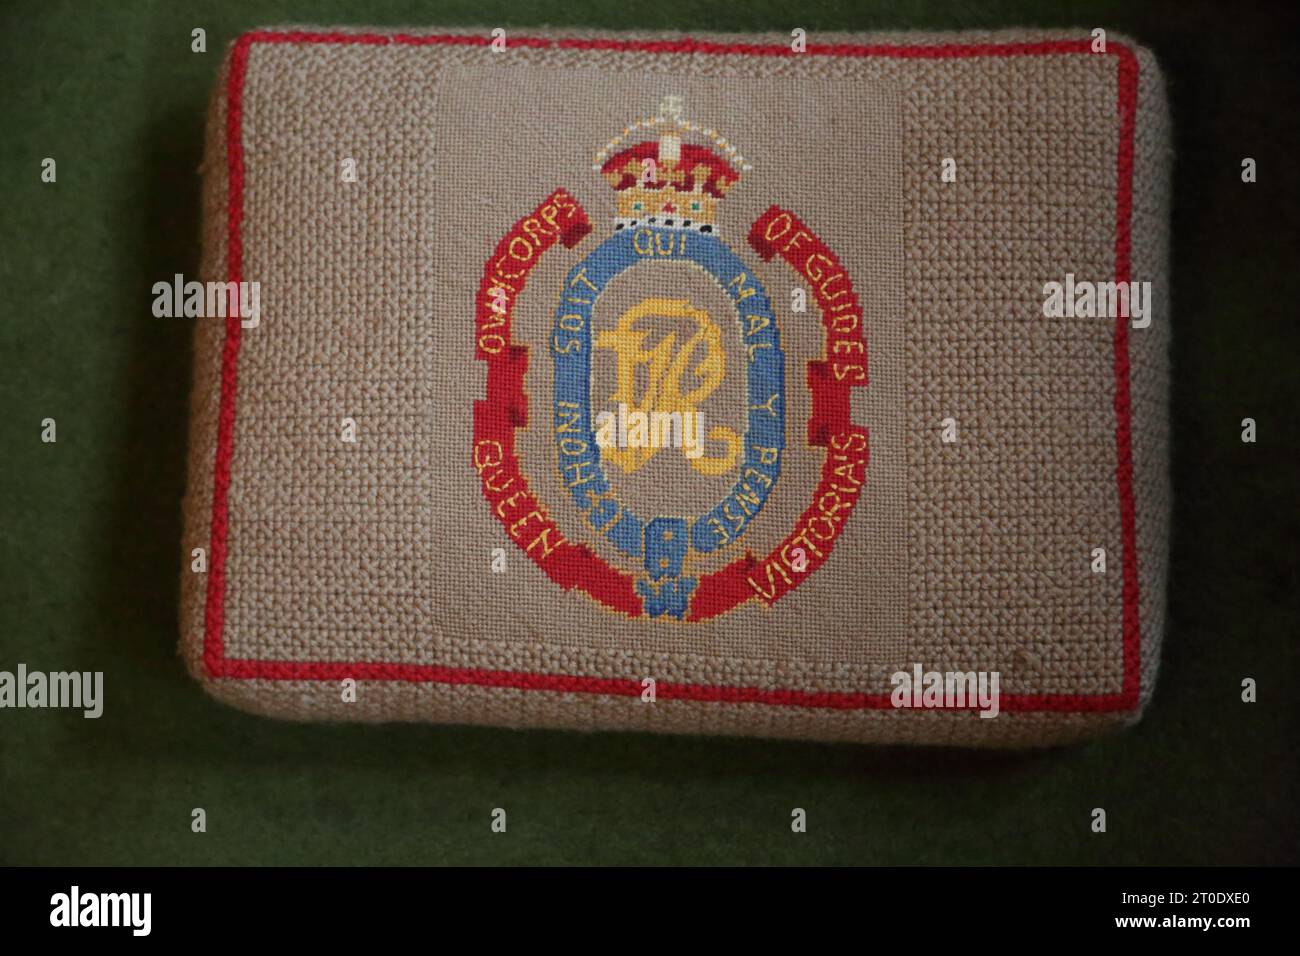 St Luke's Church Queen Victoria's Own Corp of Guides (was a Regiment in the British Indian Army)  Regiment Badge Embroidered on Prayer Kneeler Chelsea Stock Photo